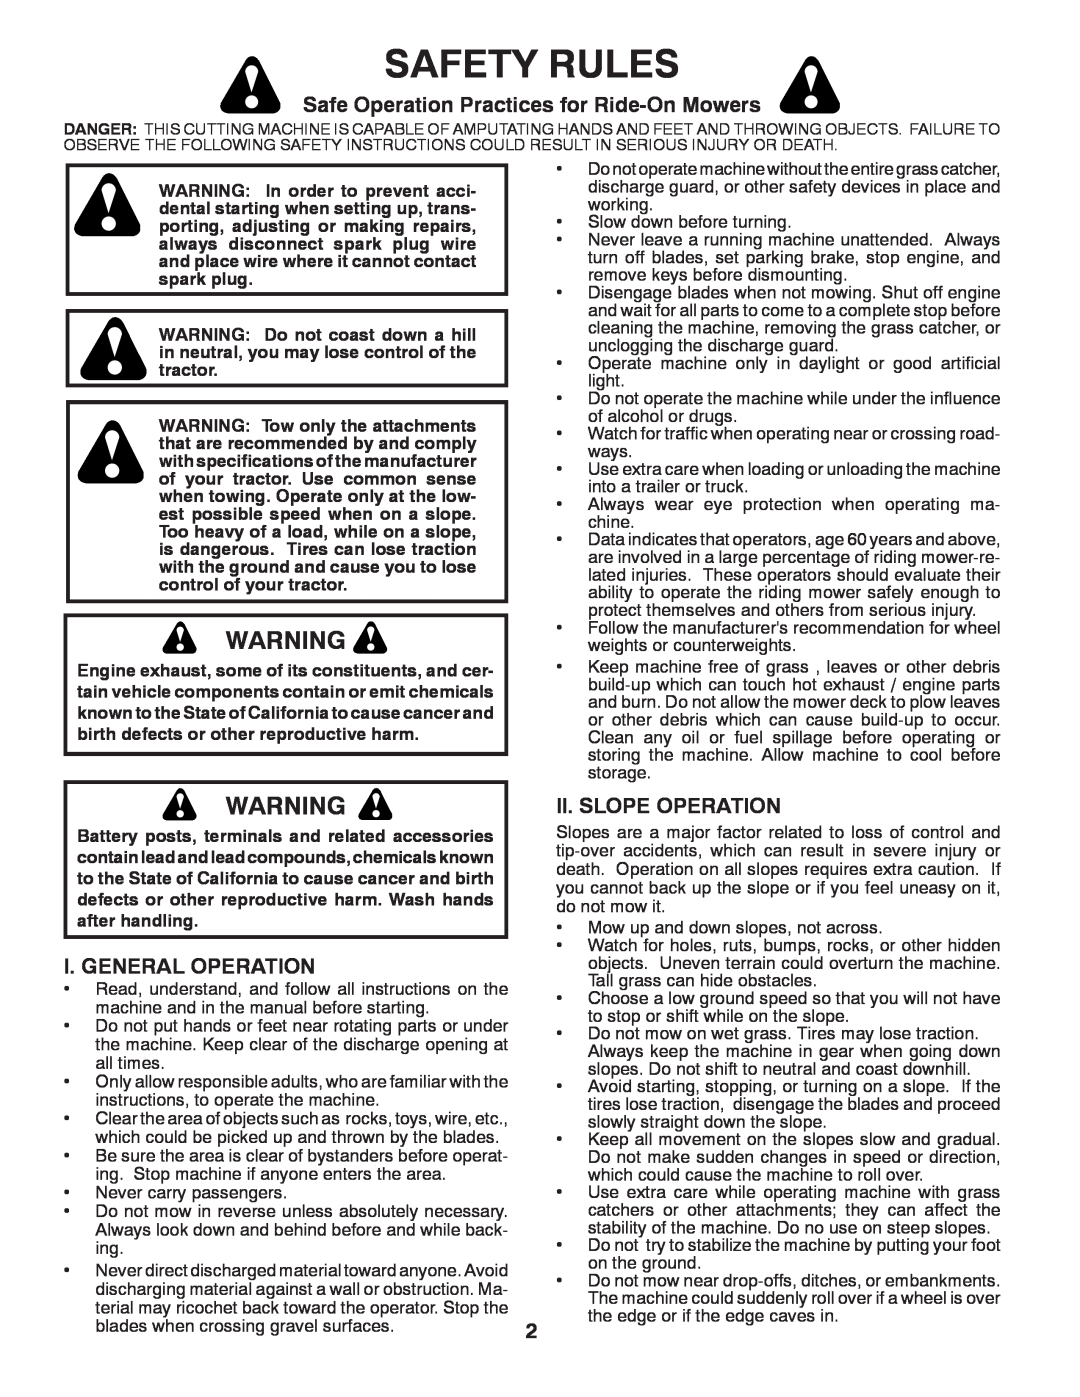 Poulan PB19542LT Safety Rules, Safe Operation Practices for Ride-On Mowers, I. General Operation, Ii. Slope Operation 